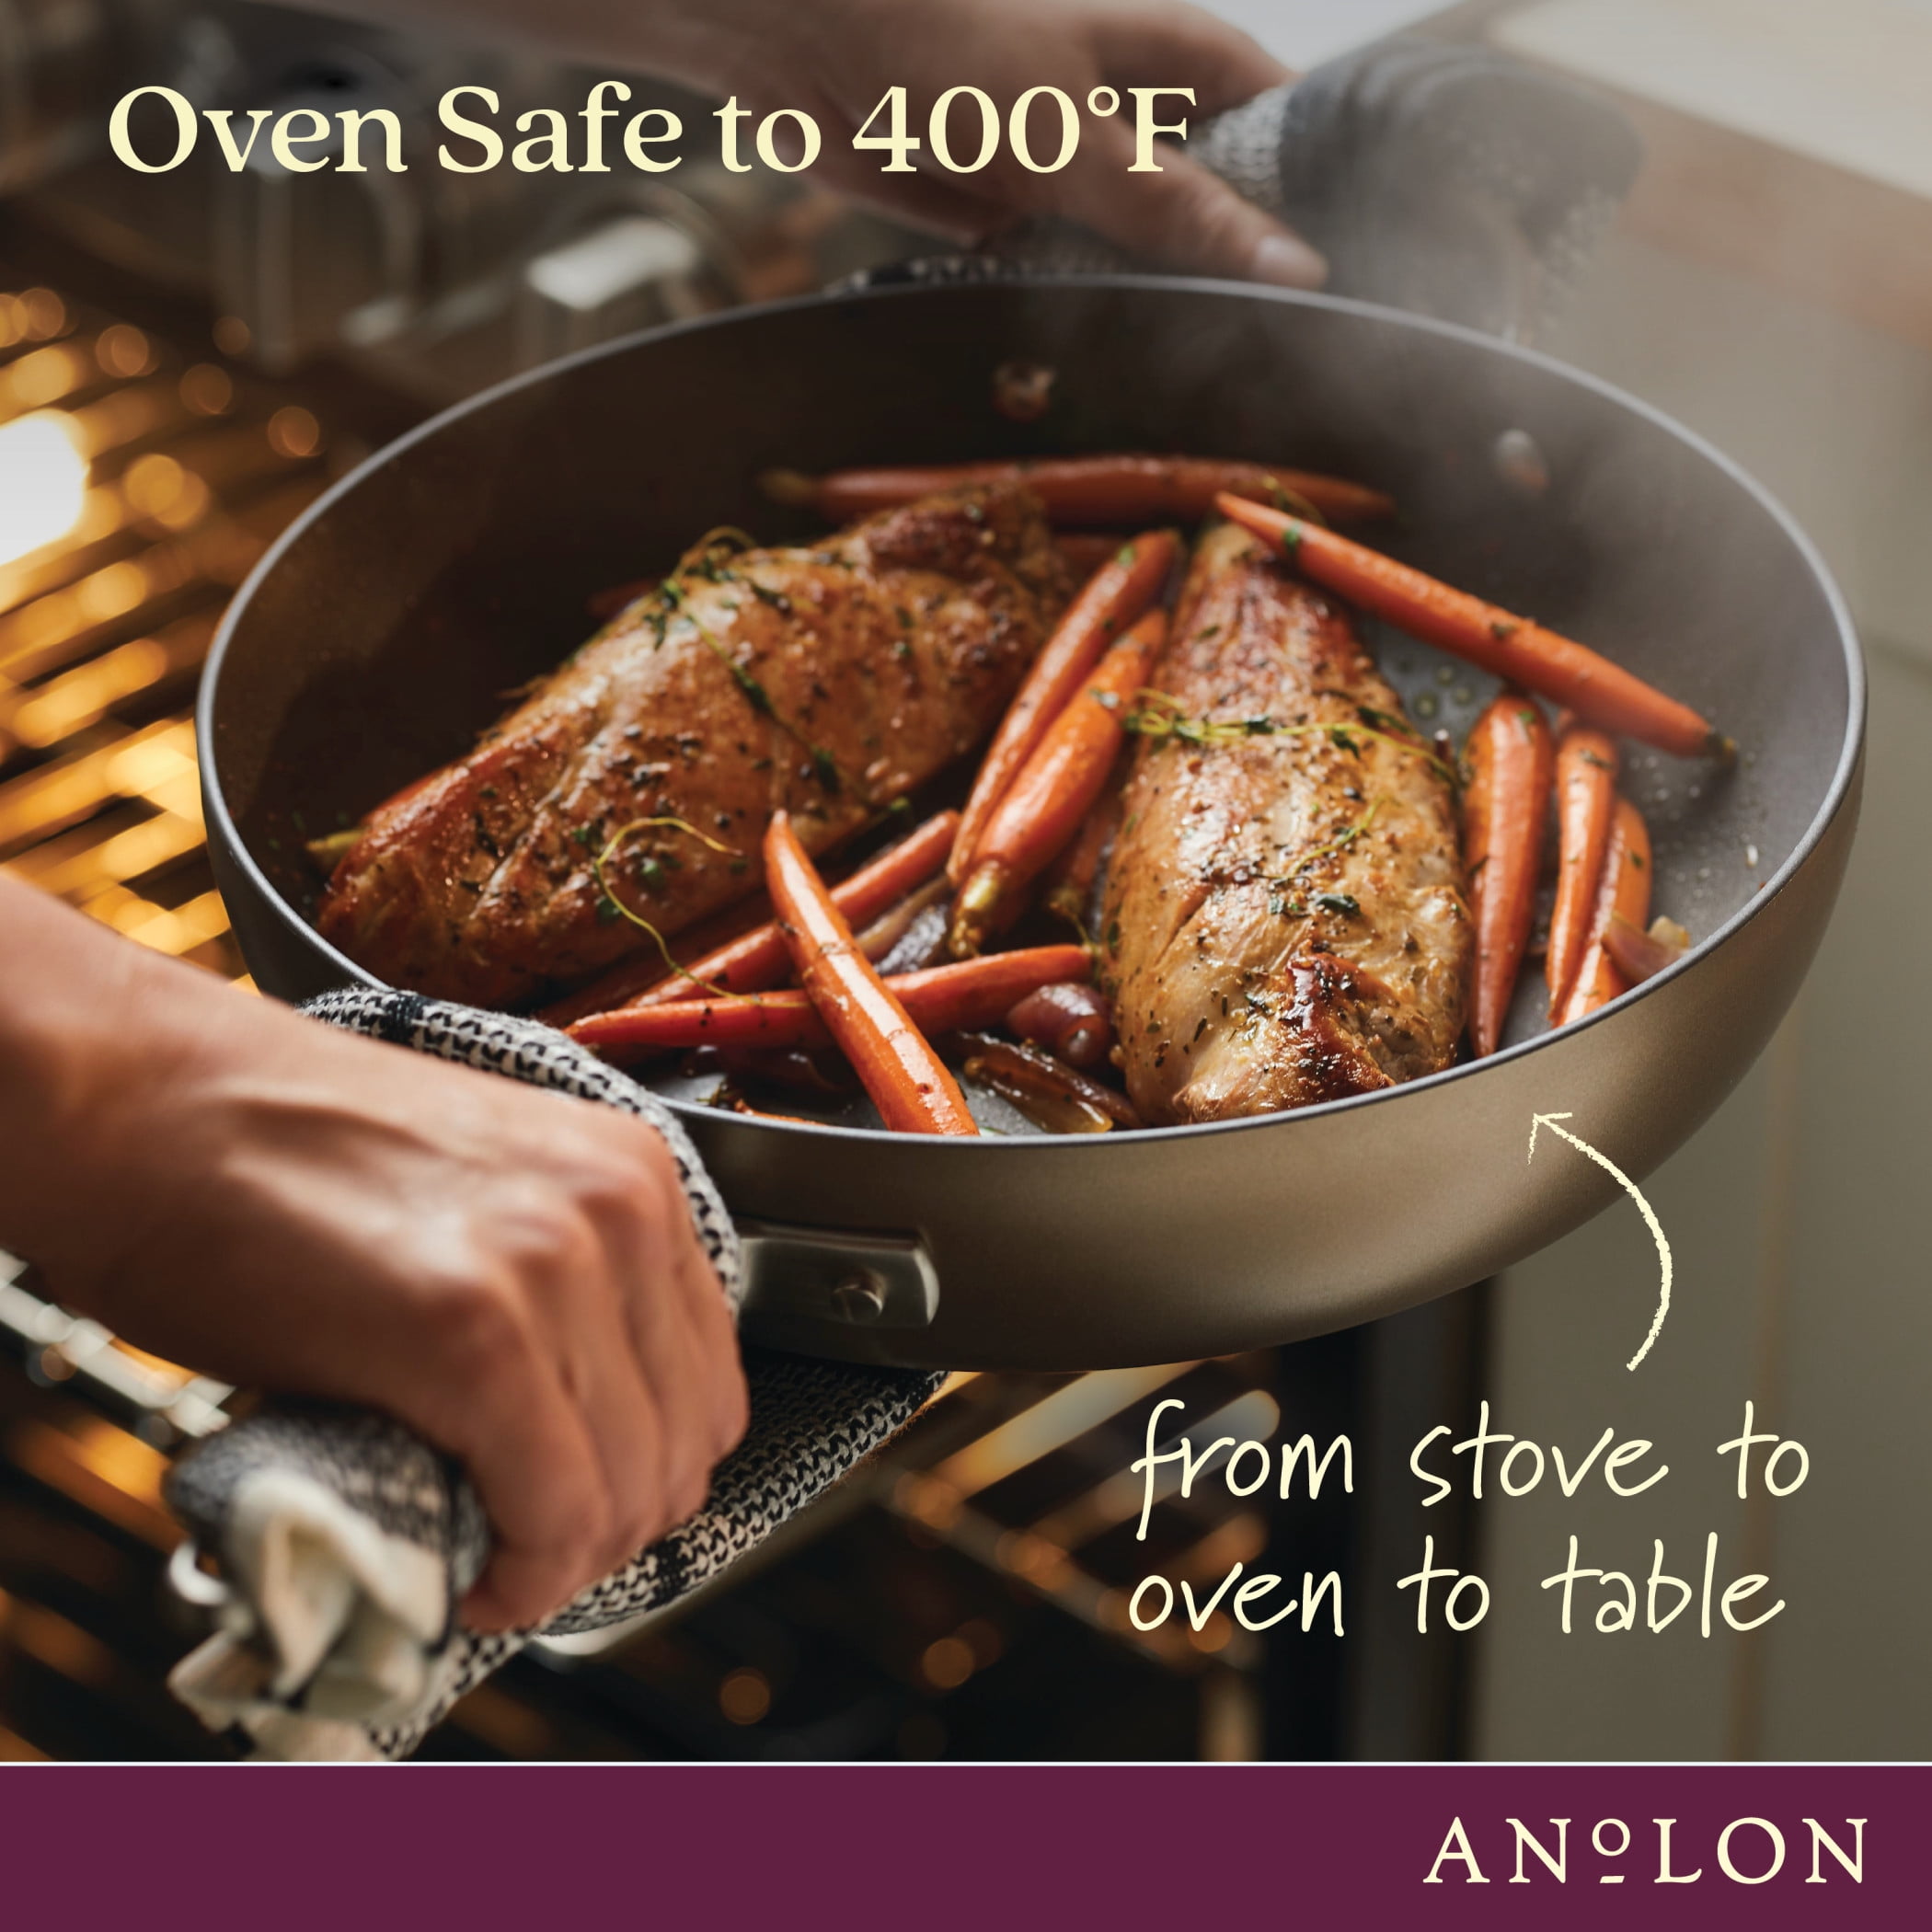 Anolon Advanced Hard Anodized Nonstick 10 In. And 12 In. French Skillet  Twin Pack, Fry Pans & Skillets, Household